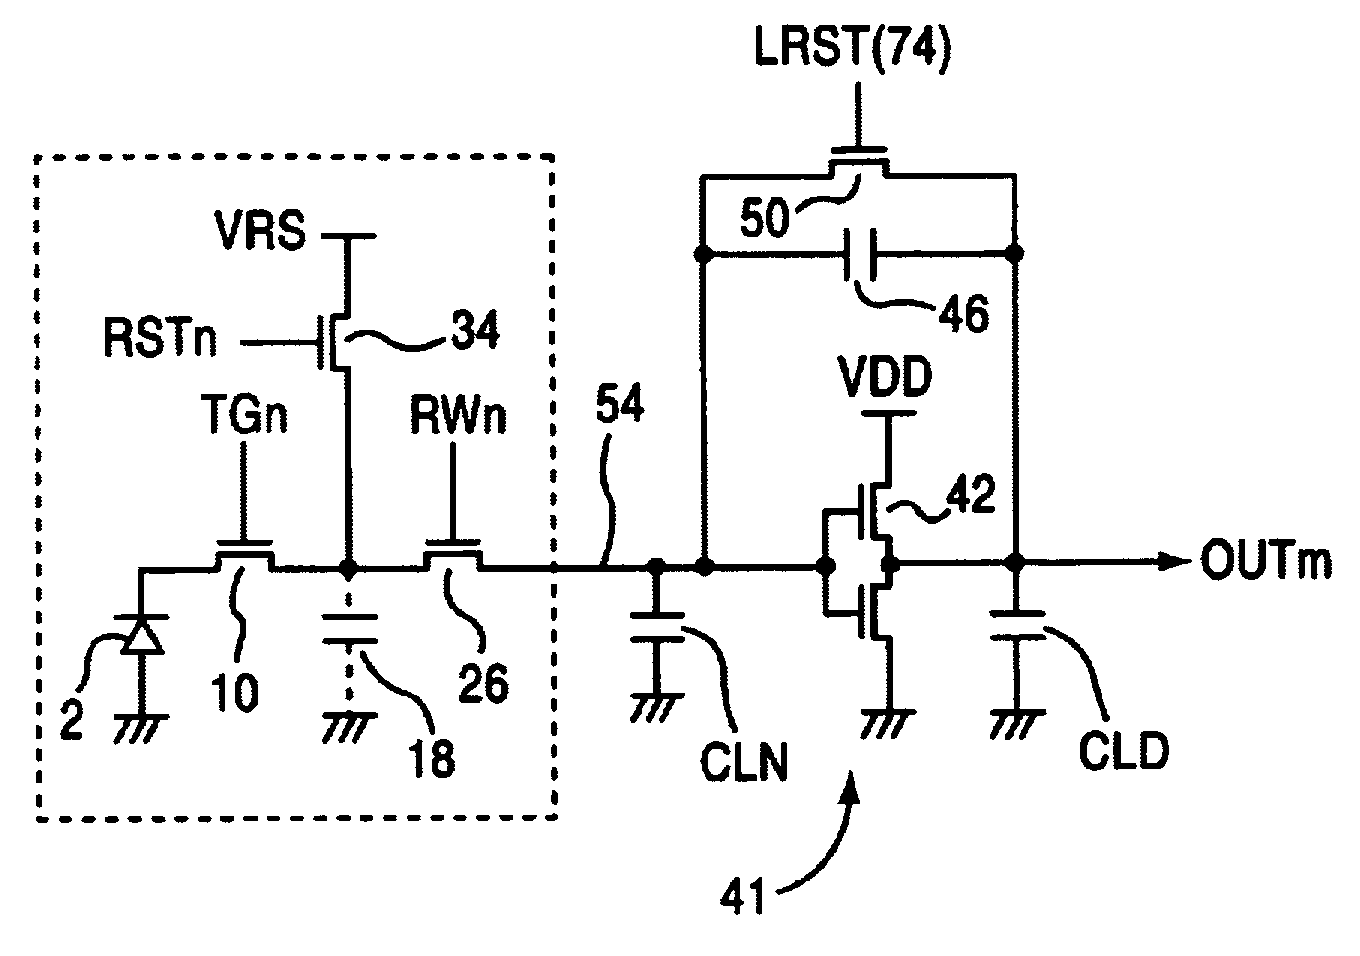 Solid-state imaging device with the elimination of thermal noise